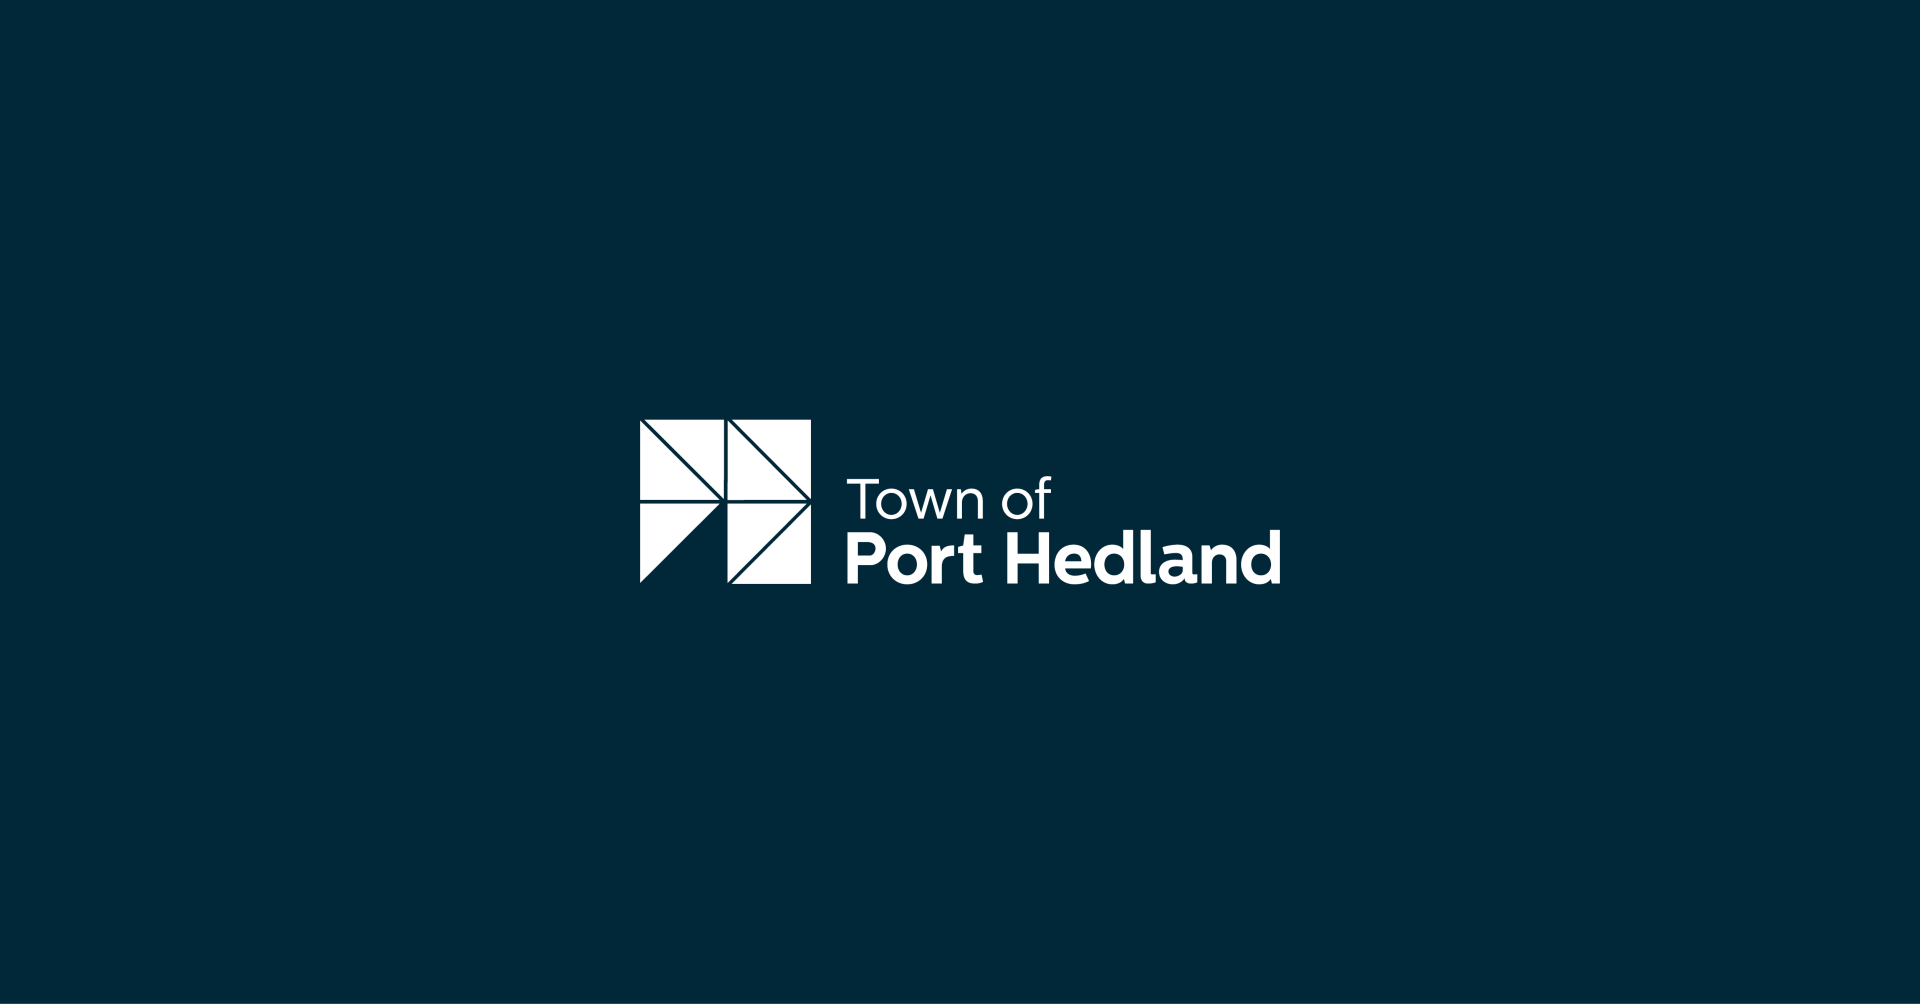 Statement from the Town of Port Hedland